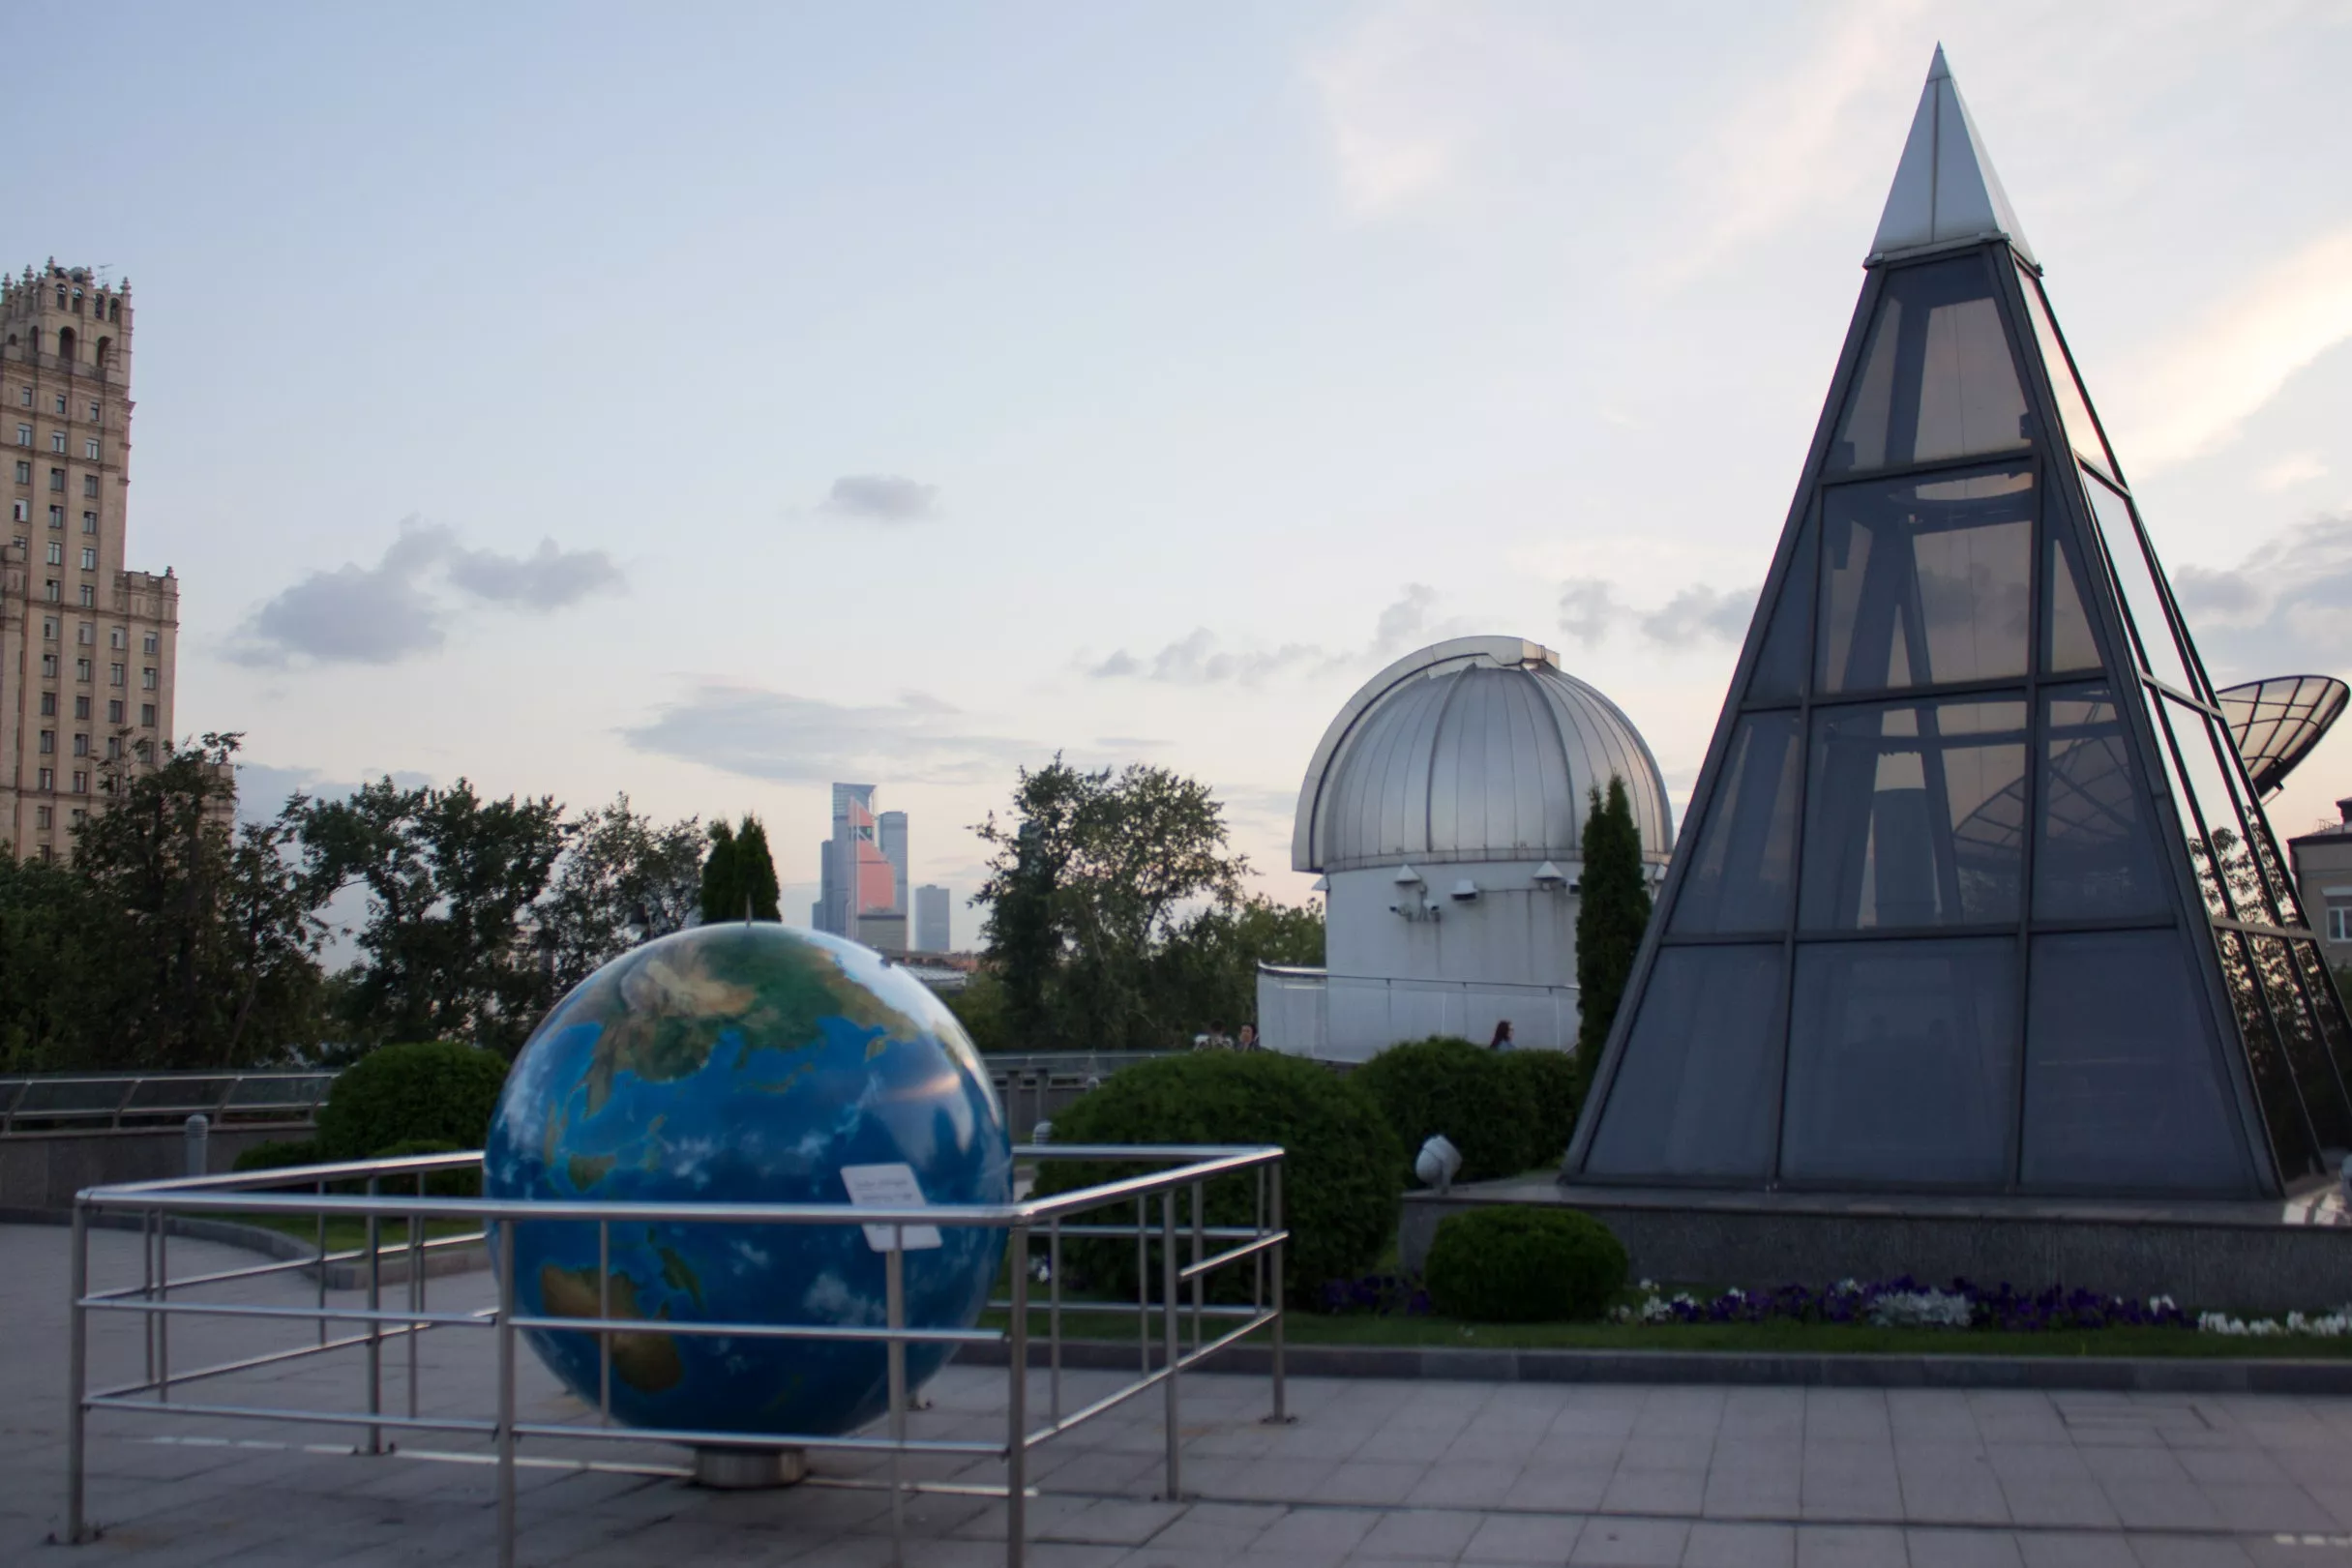 Moscow Planetarium in Russia, Europe | Observatories & Planetariums - Rated 3.8